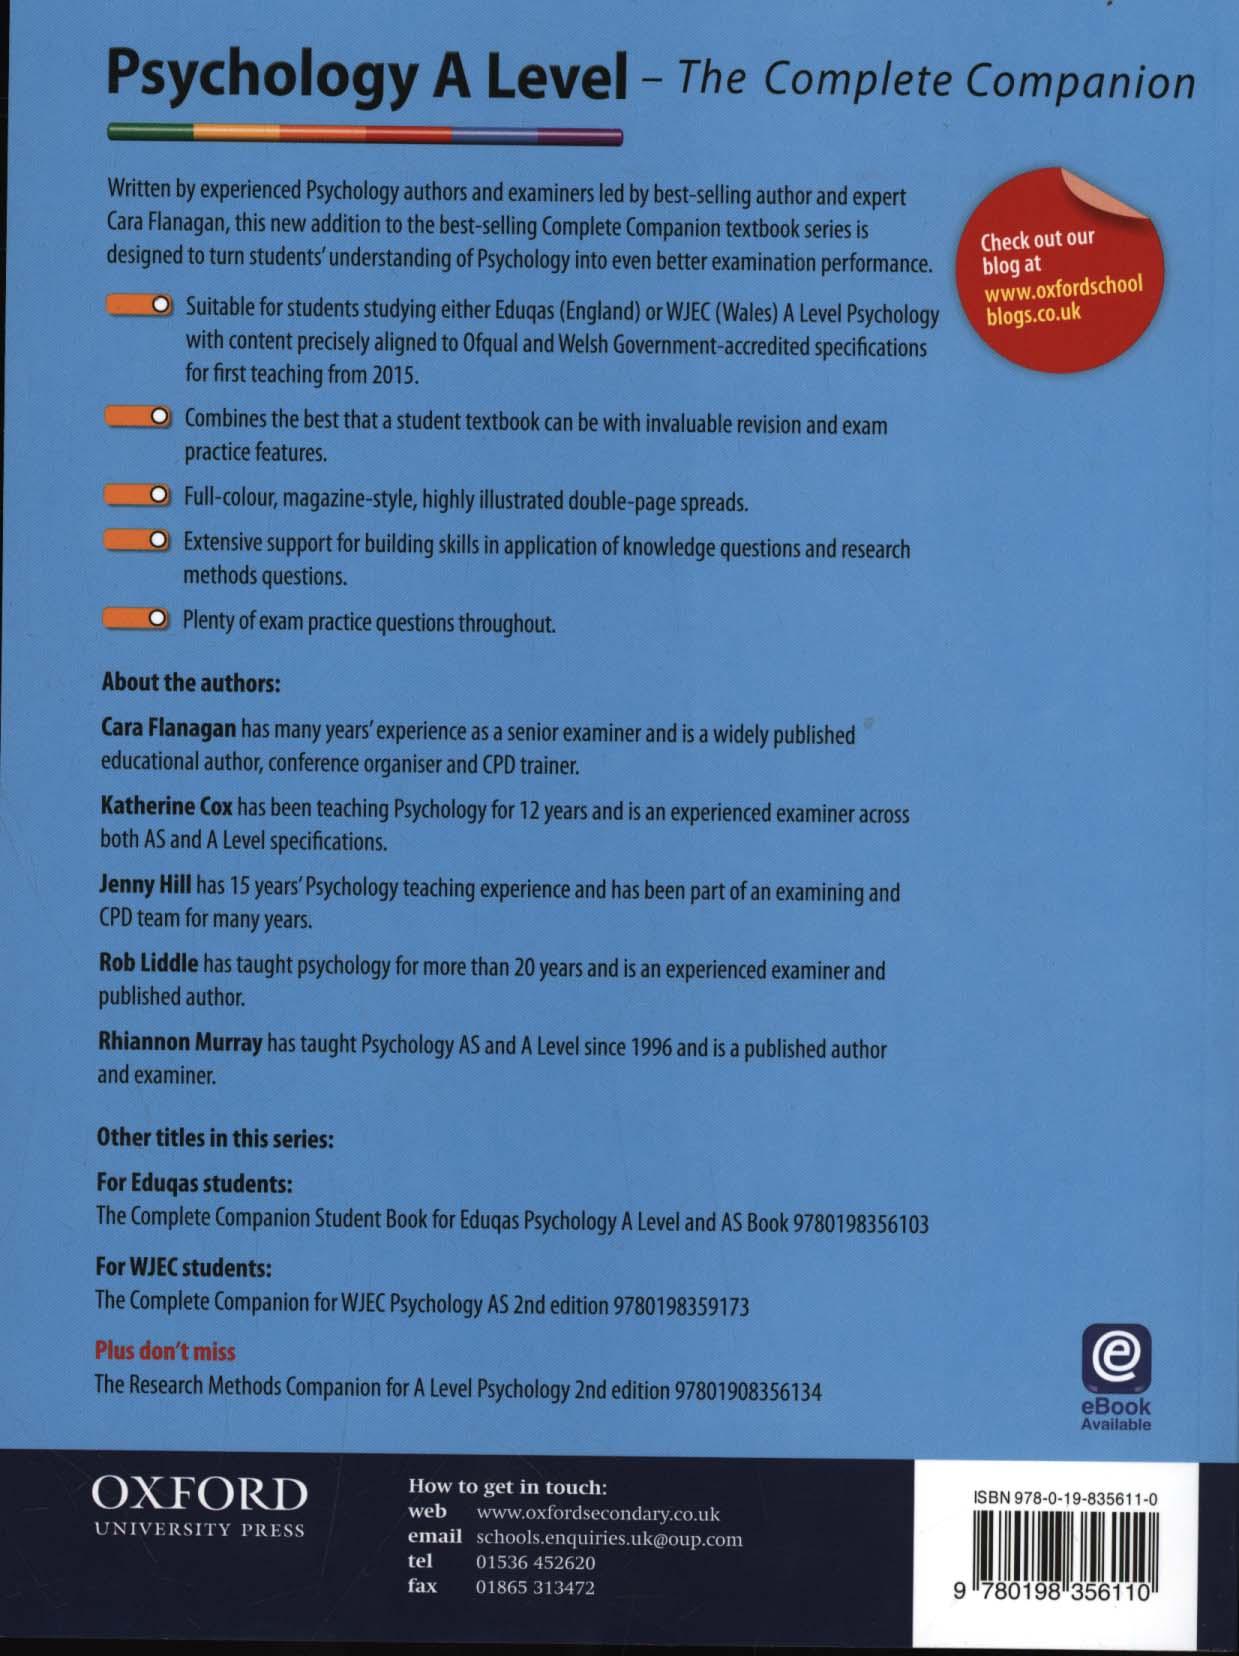 Complete Companions: Year 2 Student Book for Eduqas and WJEC